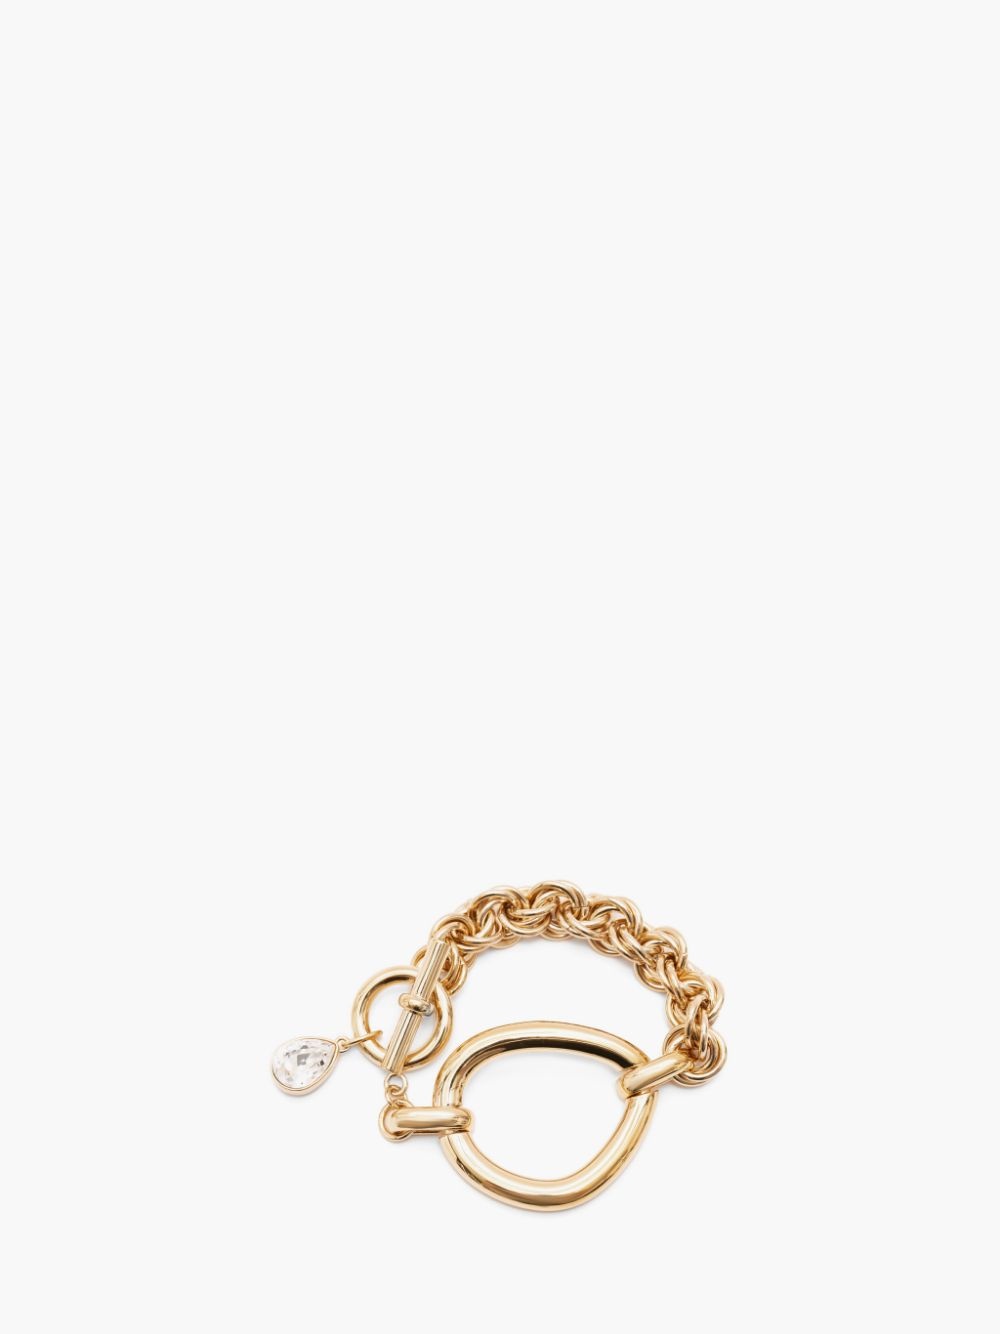 OVERSIZED LINK CHAIN BRACELET WITH CRYSTAL - 1